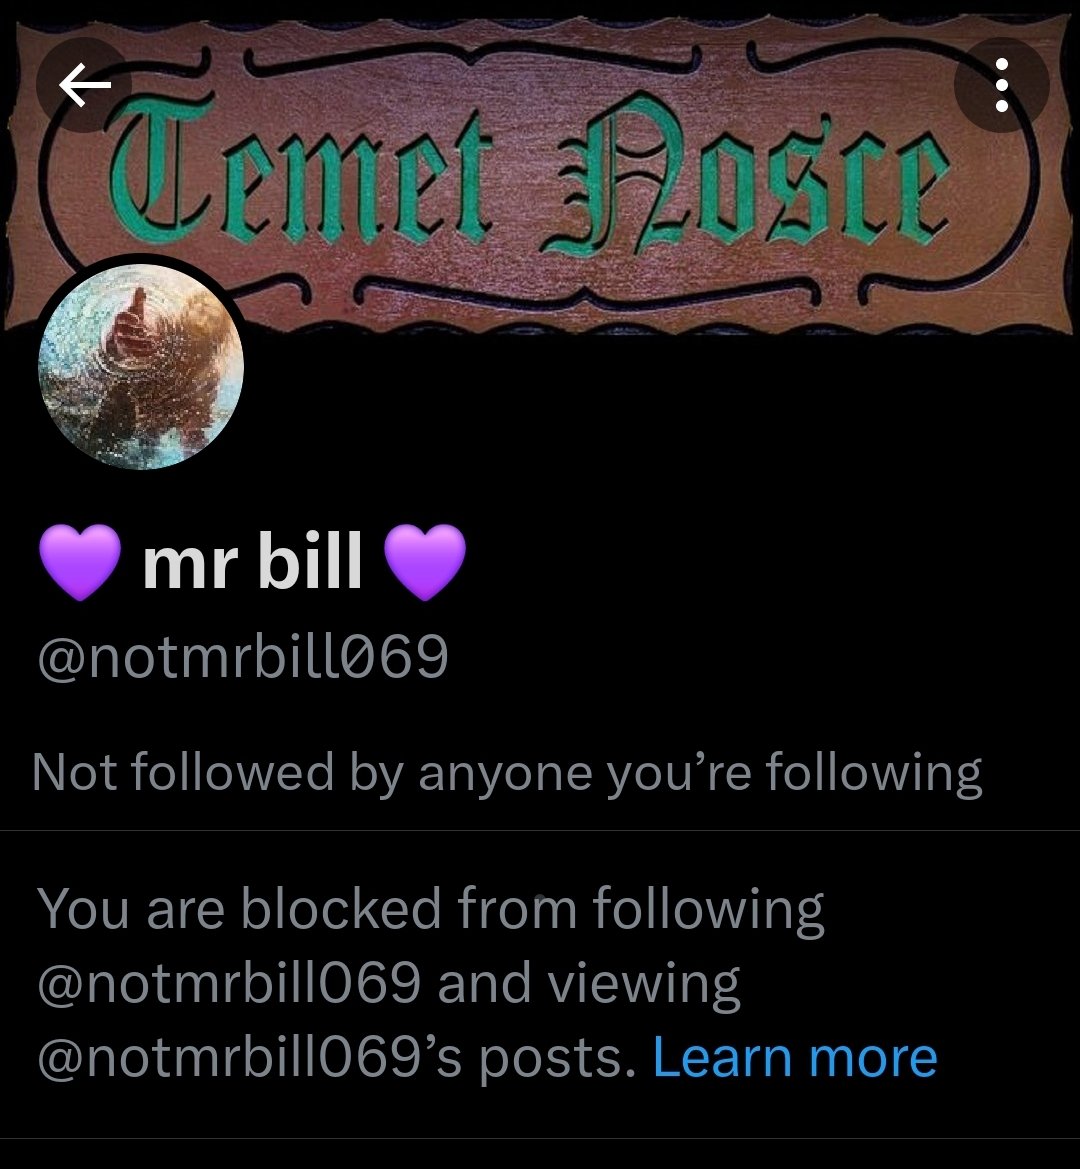 Sorry, but I'm blocked by Mr. Bill, so I can't view the posts or respond. Didn't know asking questions would get me blocked. 😓 Just want you guys to know I'm not ignoring anyone.